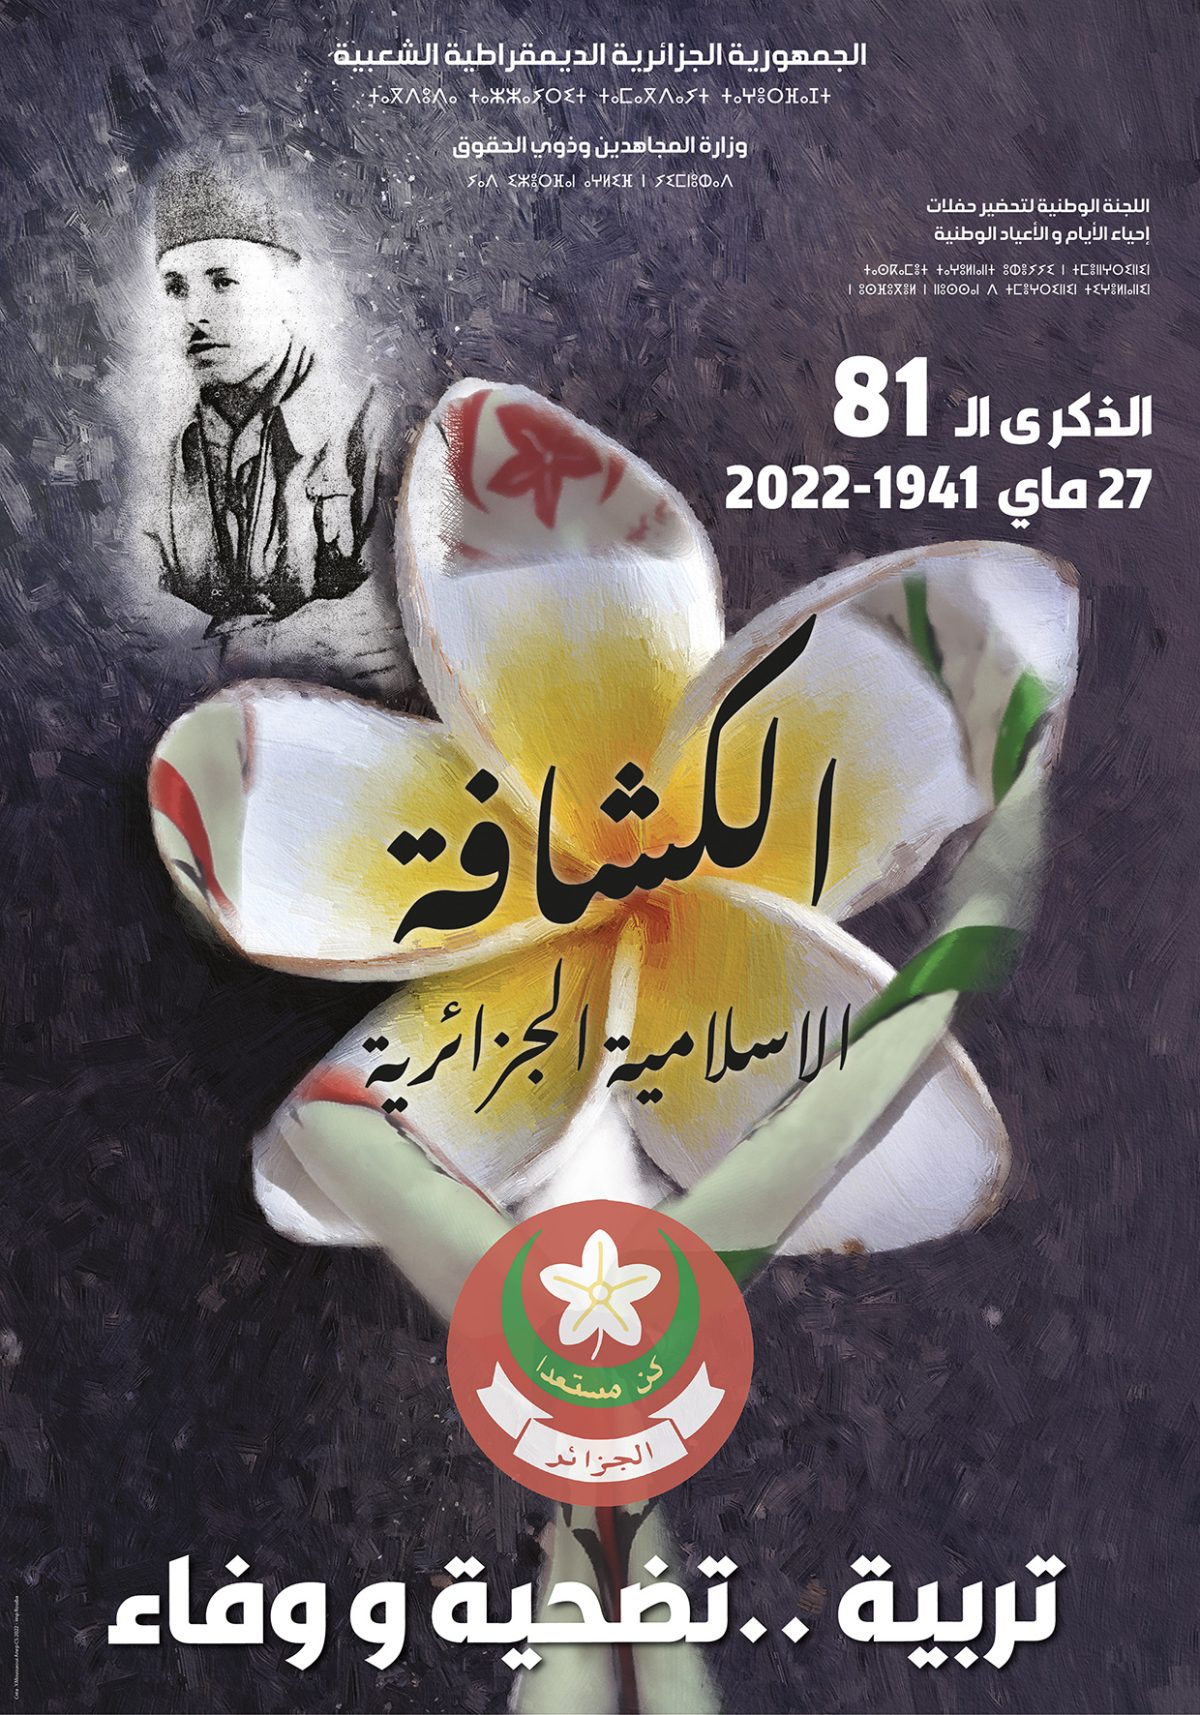 Celebration of the 81st Anniversary of the National Day of Algerian Muslim Scouts (27 May 1941 – 27 May 2022)